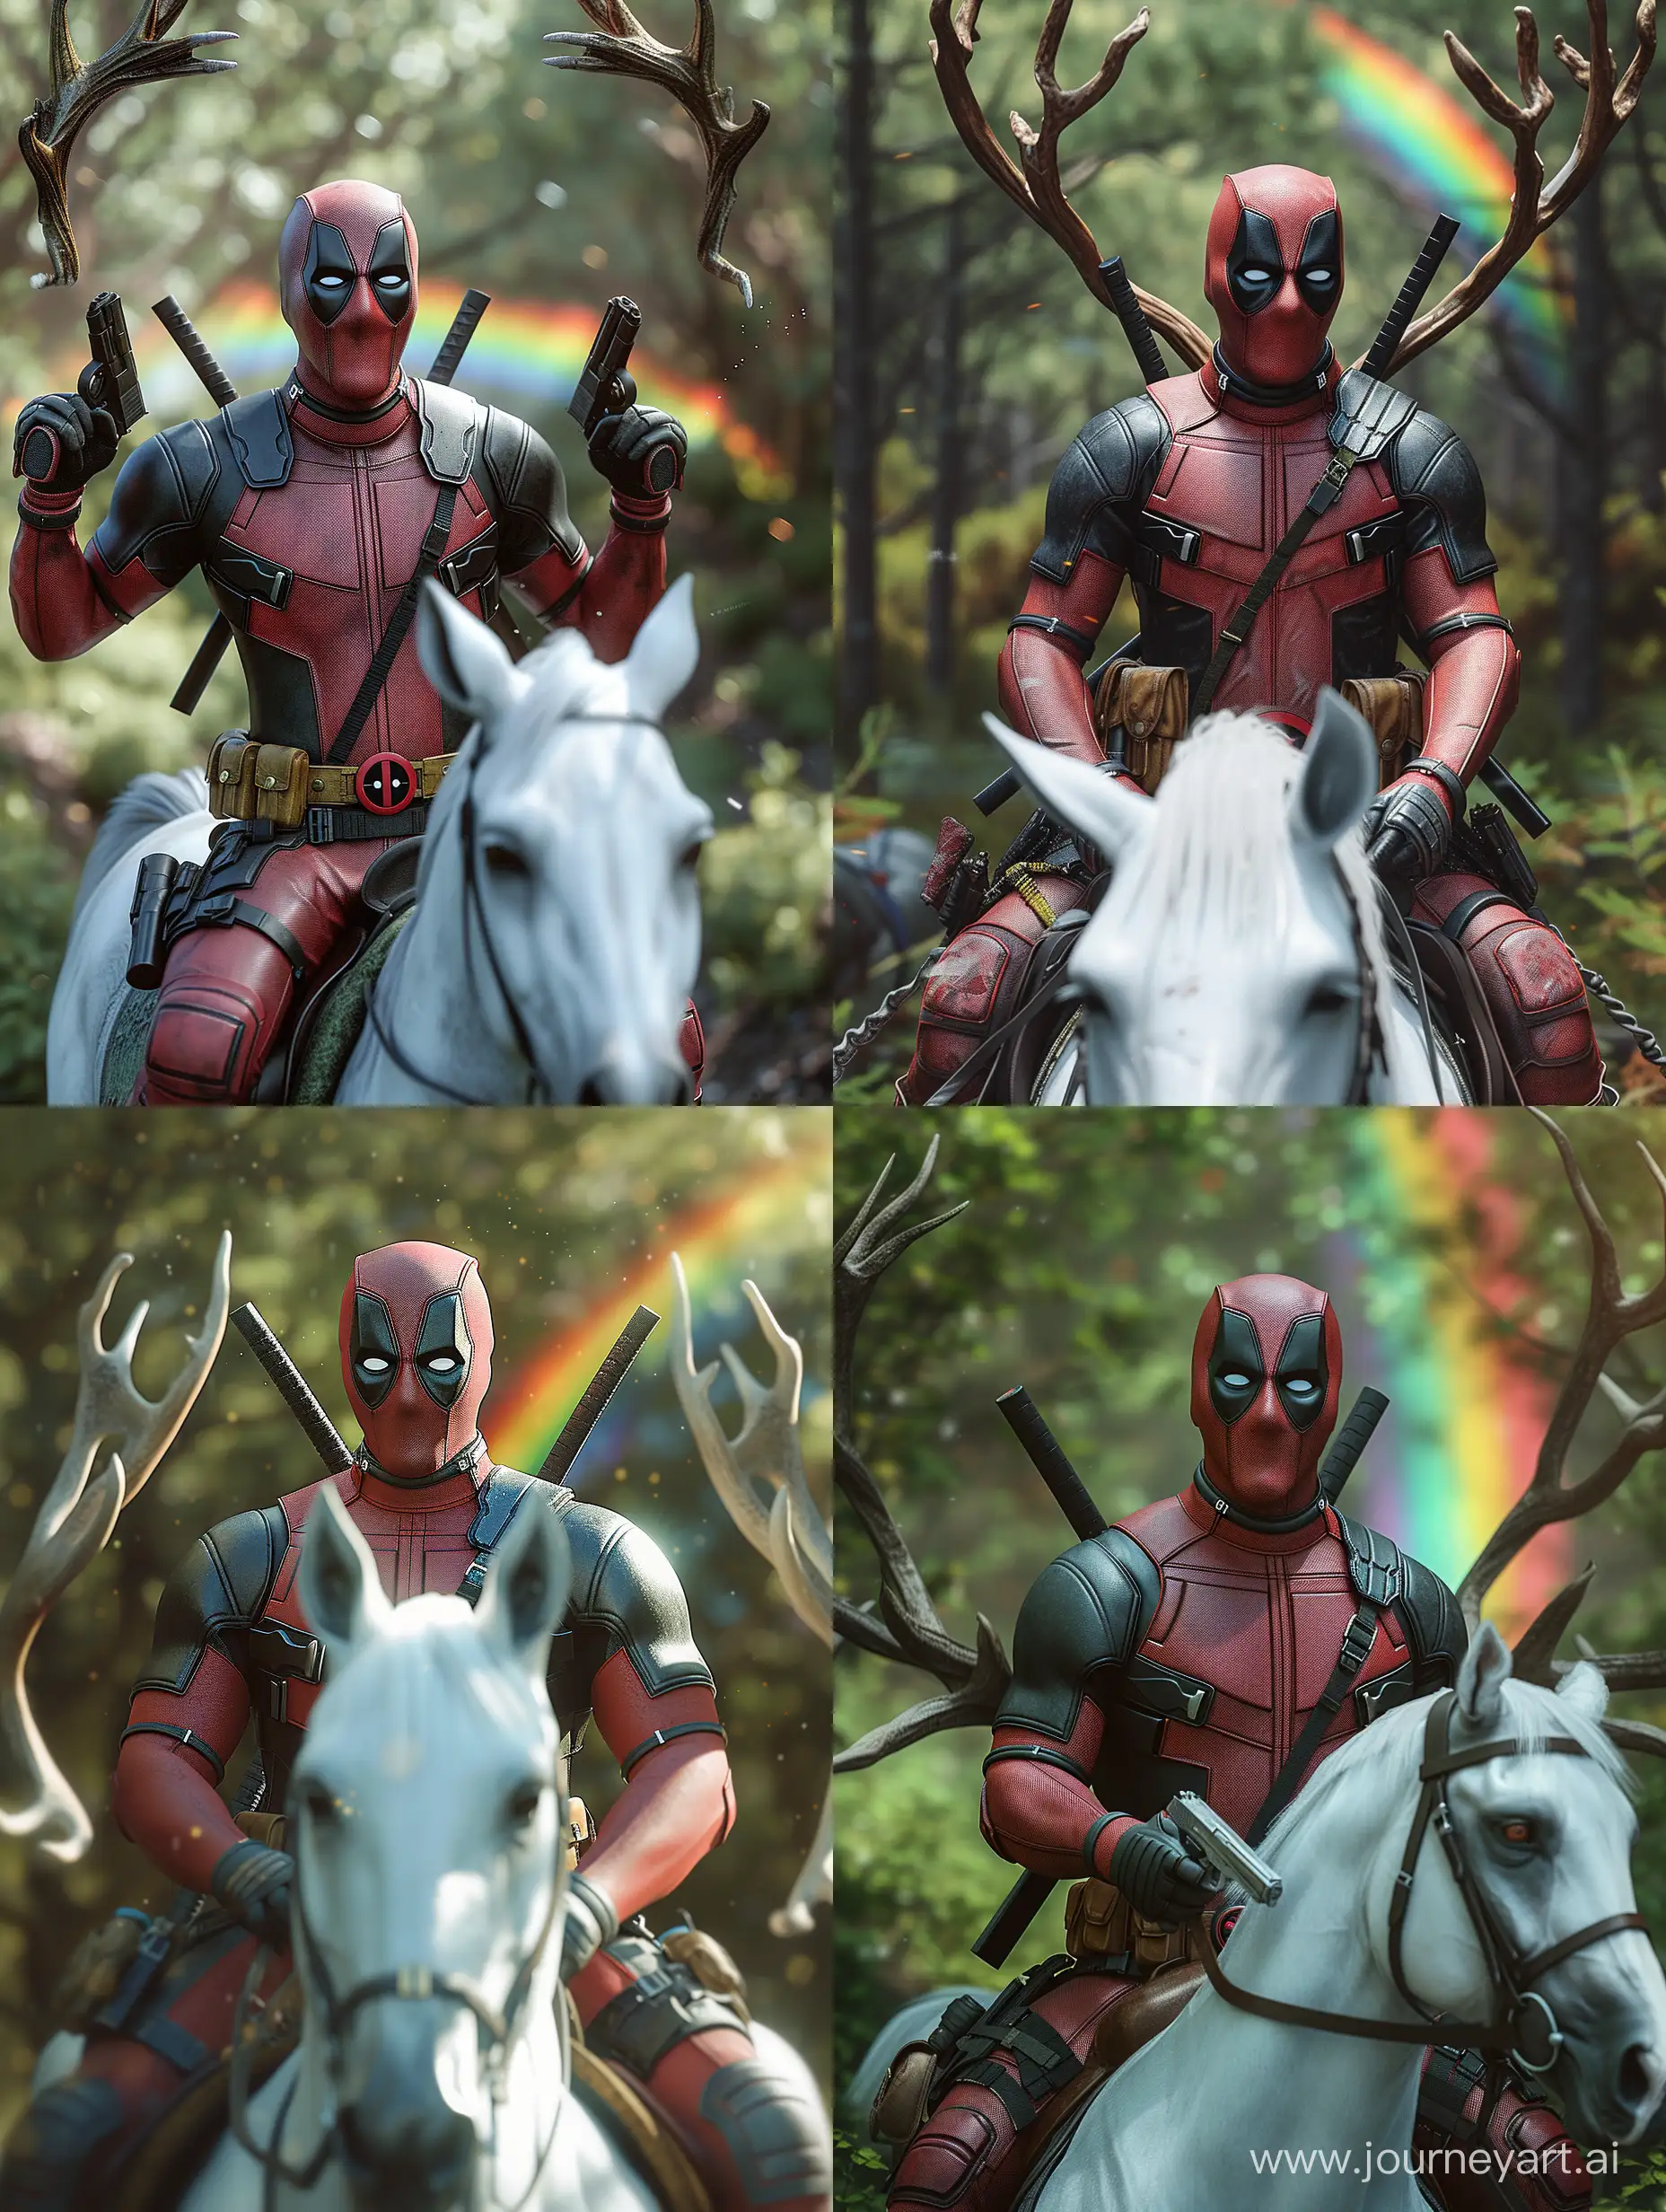 Deadpool-Riding-a-Majestic-Antlered-Horse-in-a-Enchanted-Forest-with-Rainbow